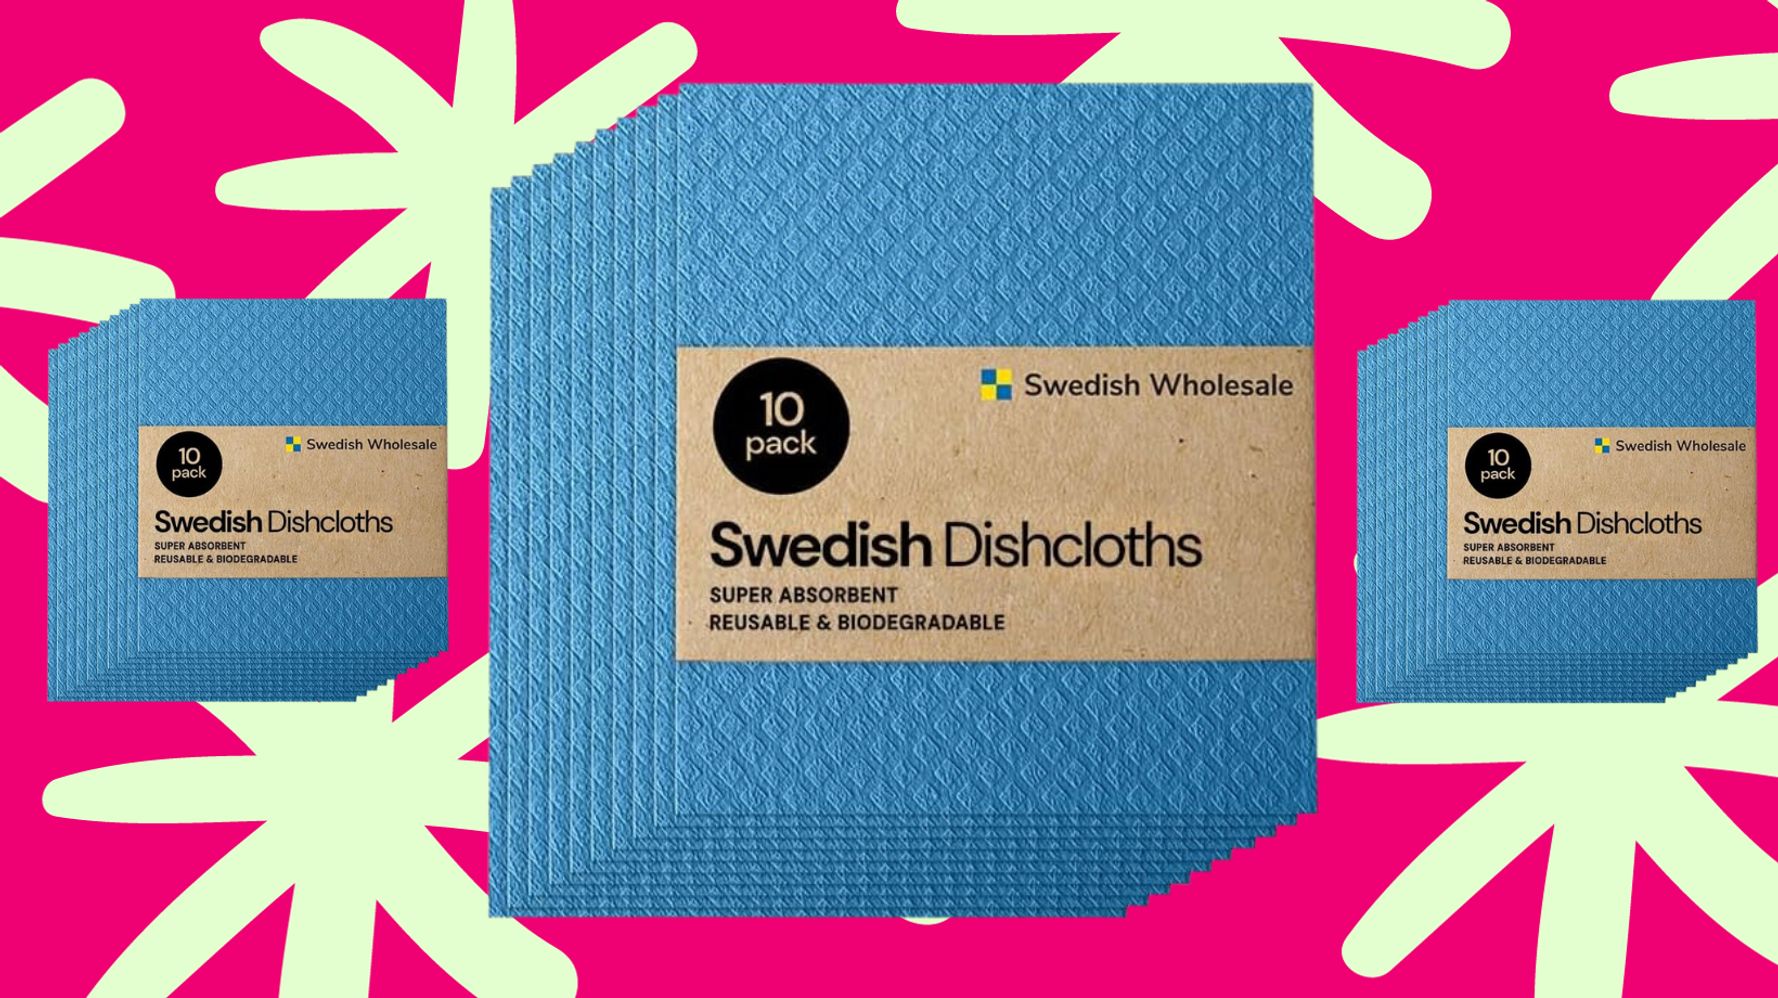 Swedish Wholesale Swedish Dish Cloths - 10 Pack Reusable, Absorbent Hand Towels for Kitchen, Counters & Washing Dishes - Cellulose Sponge Cloth - Eco